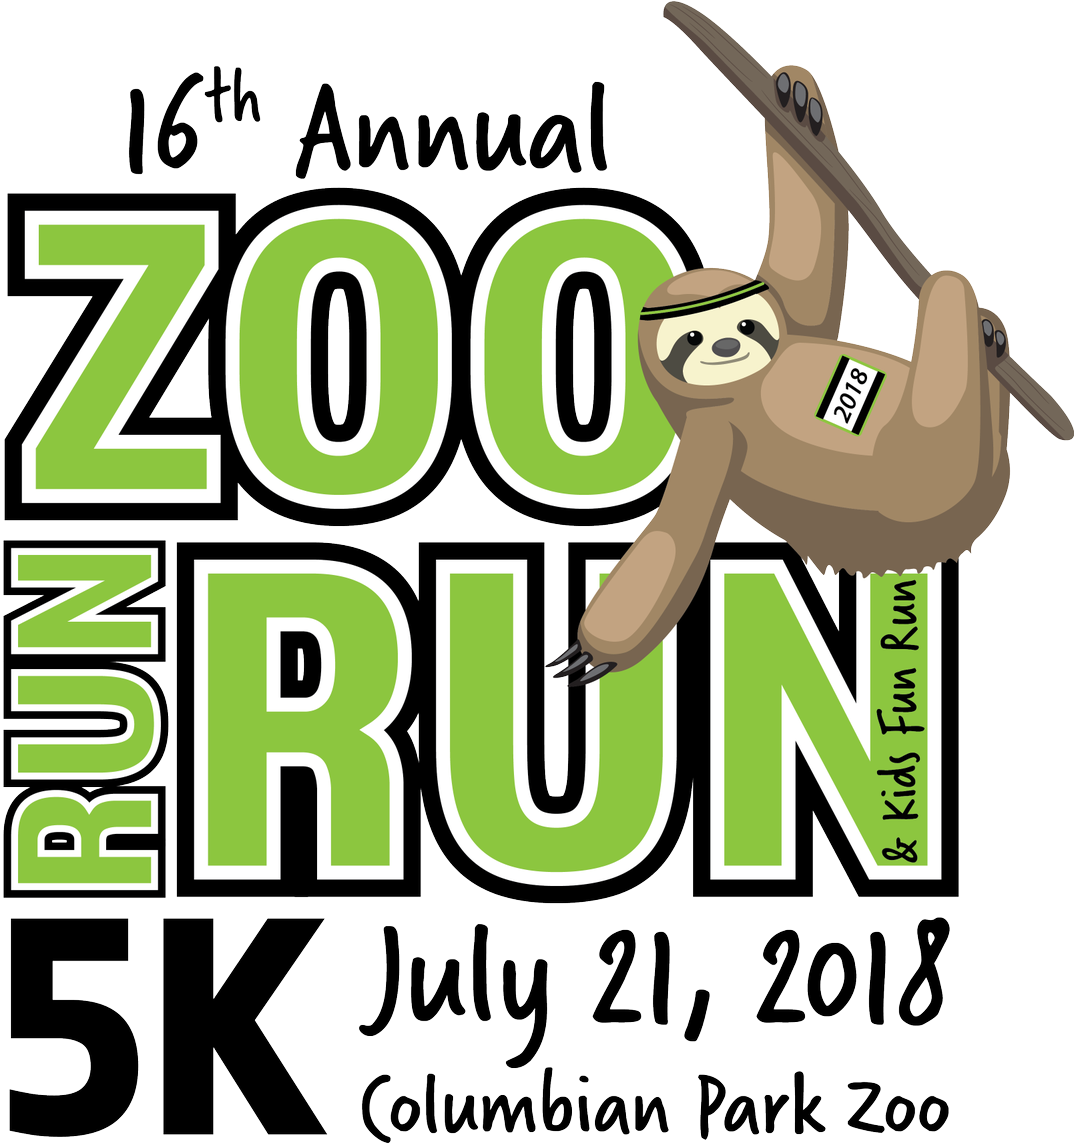 This Super-fun 5k Race Is Open To Both Runners And - Columbian Park Zoo (1094x1200)